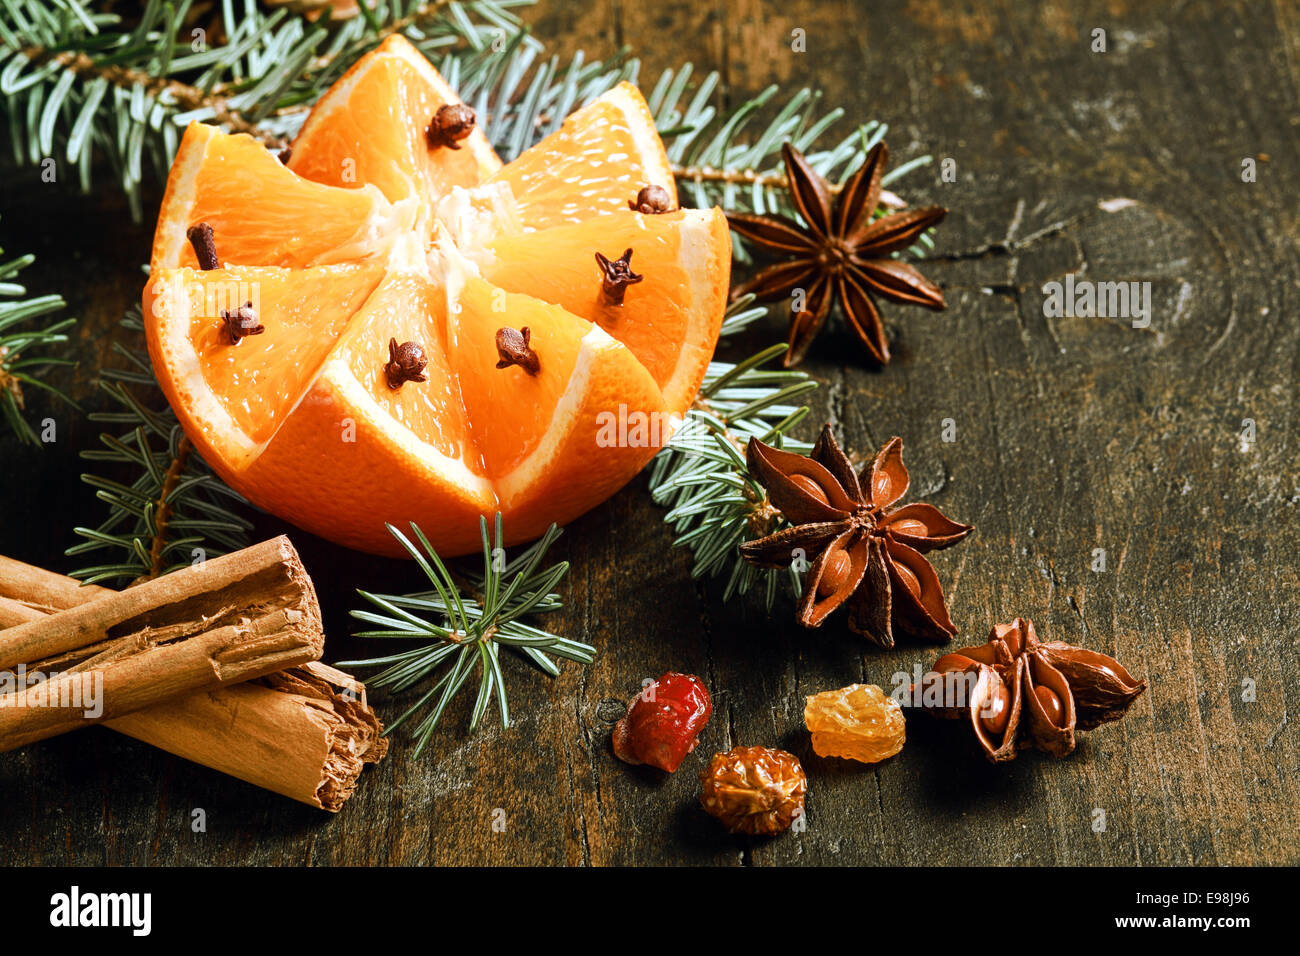 Decorative spicy orange Christmas still life with a cut fresh orange nestling in a pine branch with stick cinnamon, star abise and nuts on a rustic wooden background with copyspace for your greeting Stock Photo